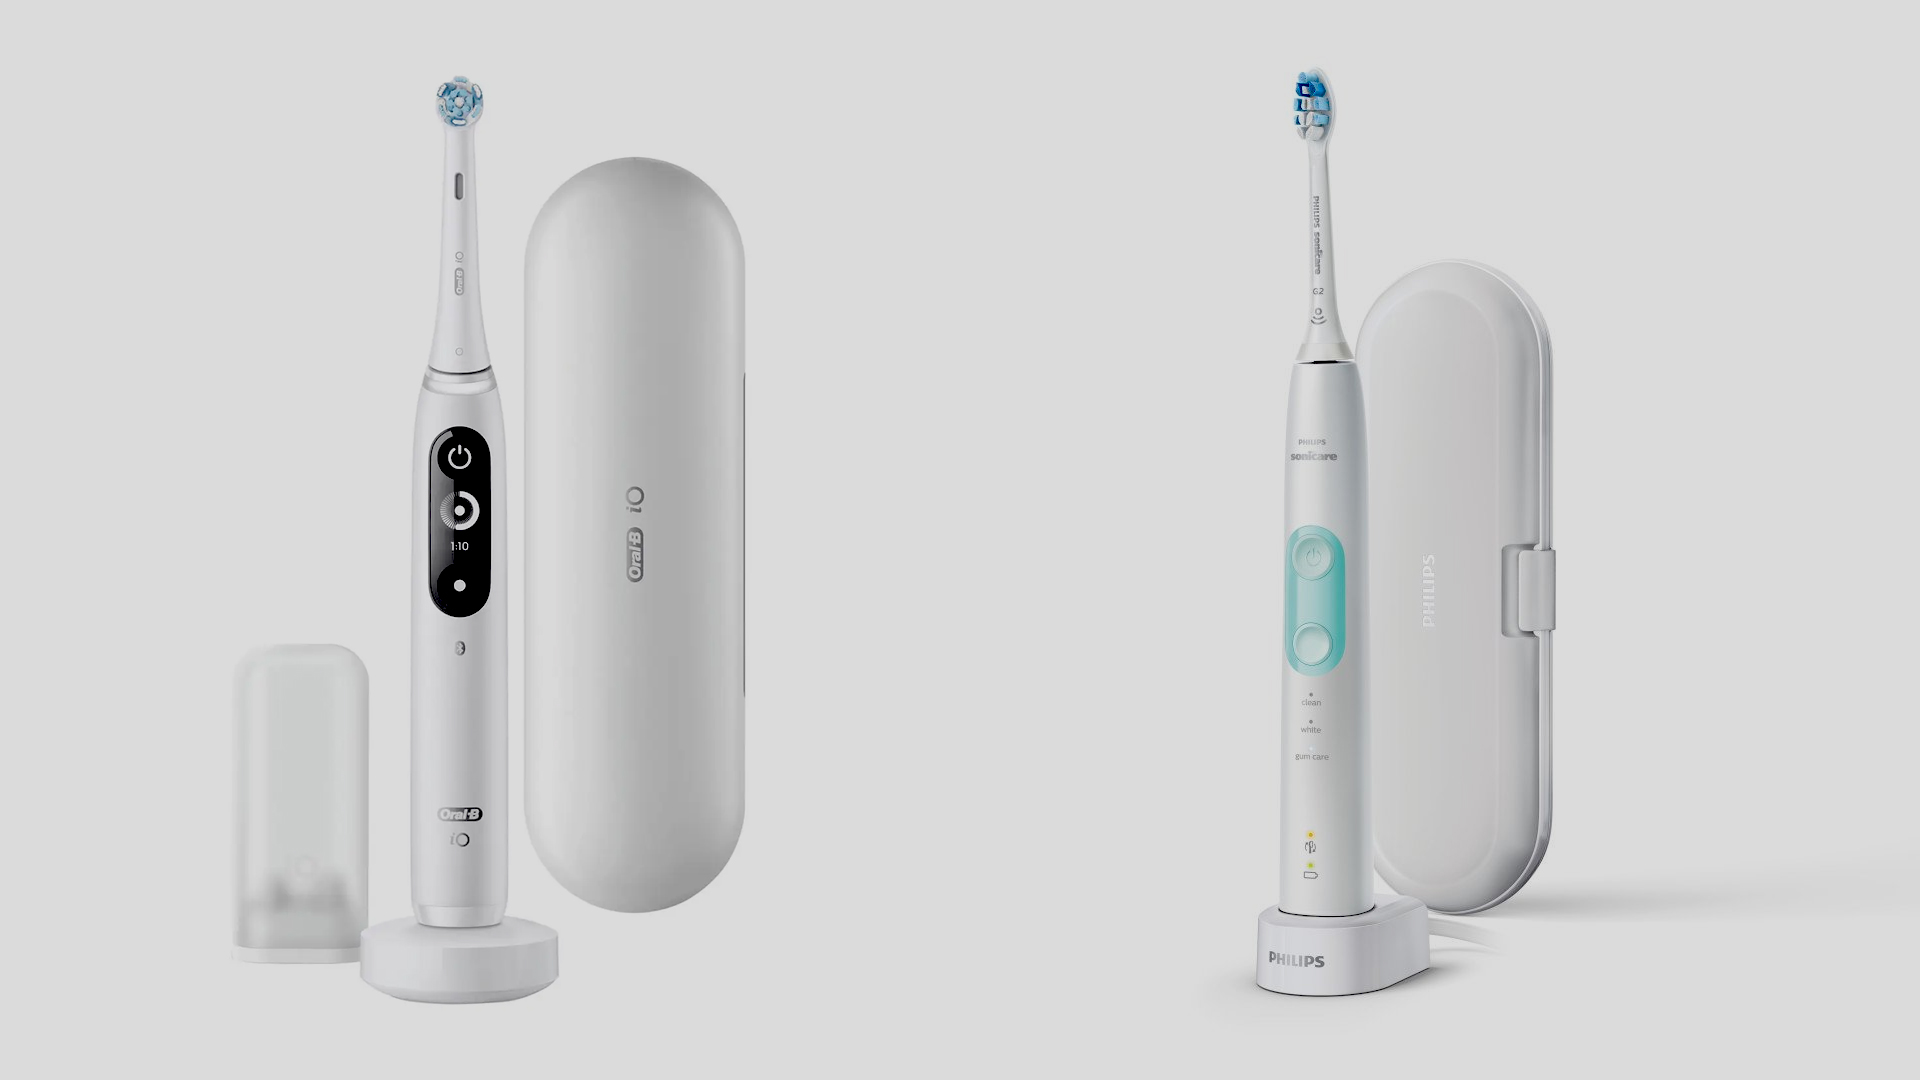 B vs Sonicare: Which toothbrush is better? | Science